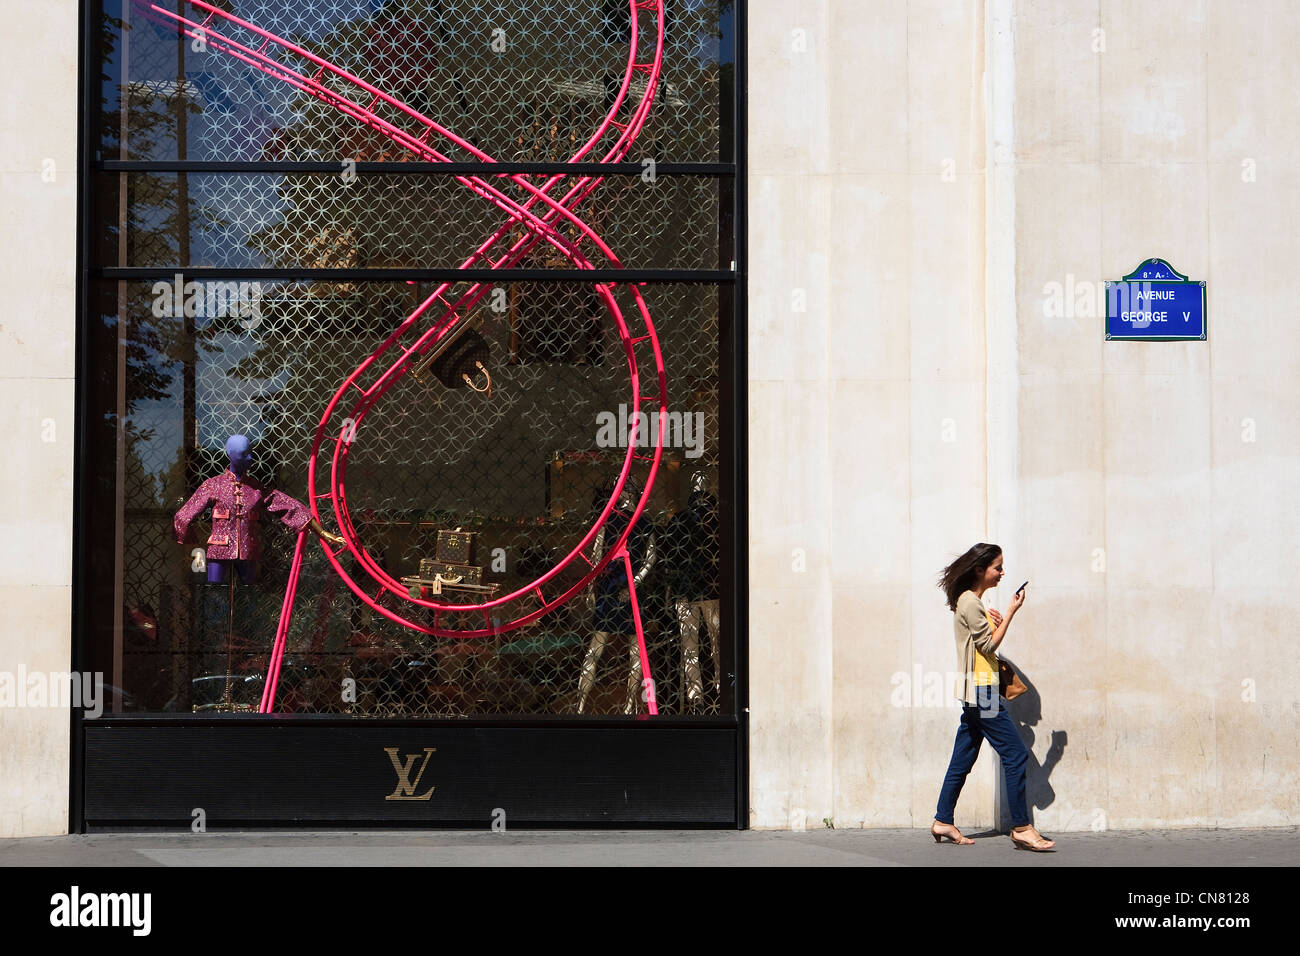 1,004 Vuitton Champs Elysees Stock Photos, High-Res Pictures, and Images -  Getty Images